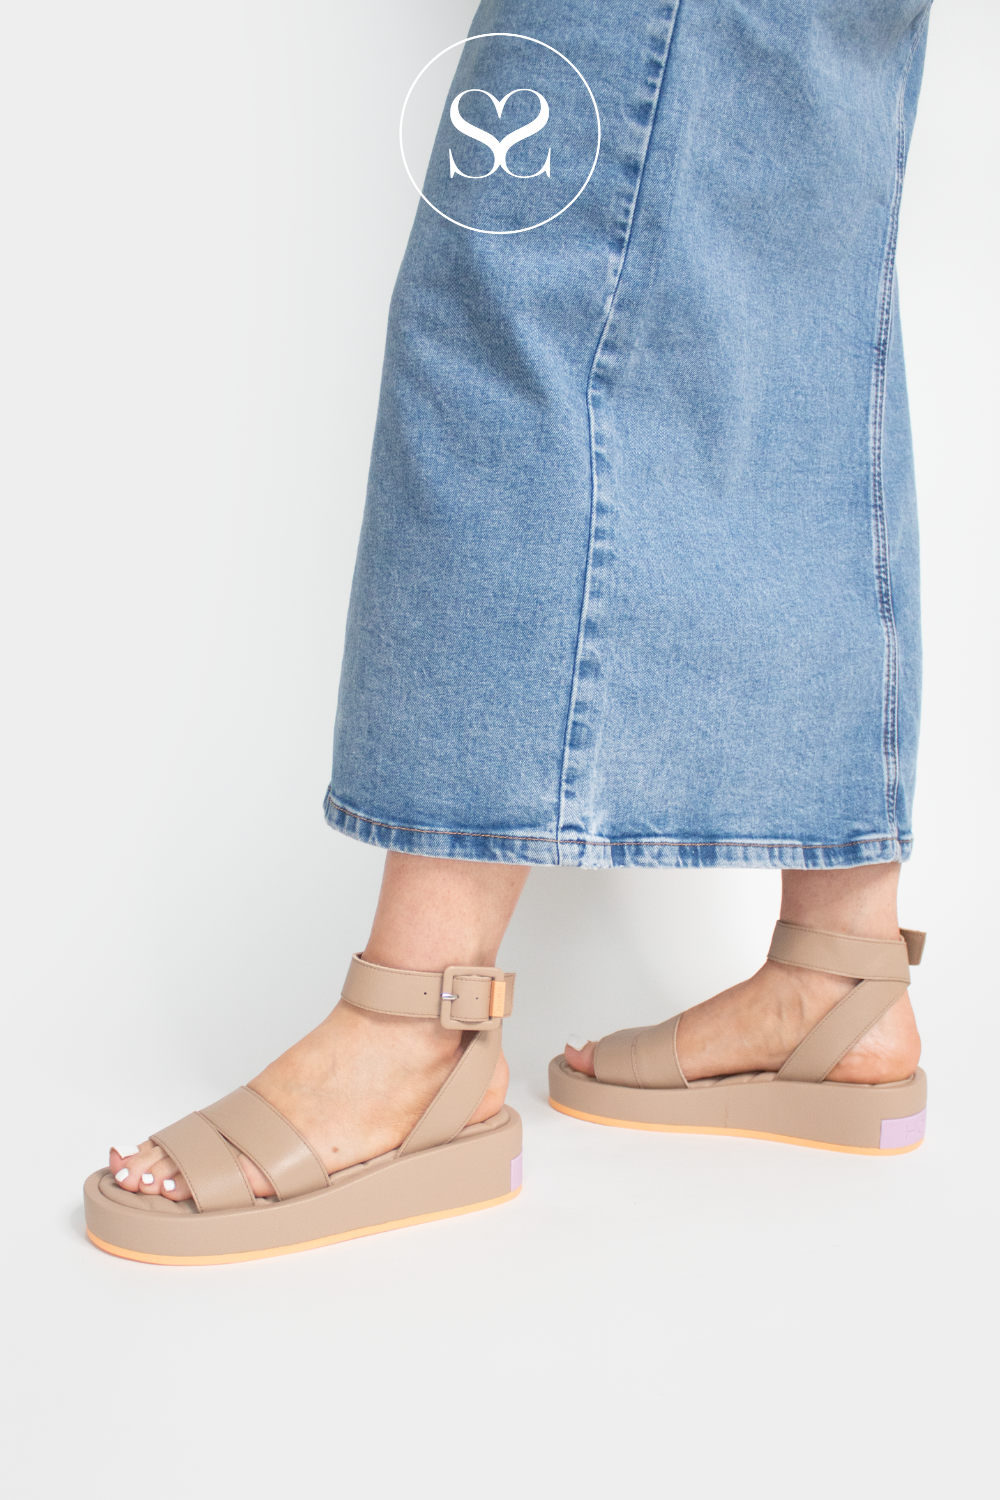 HOFF TOWN TAUPE LEATHER FLATFORM WEDGE SANDALS